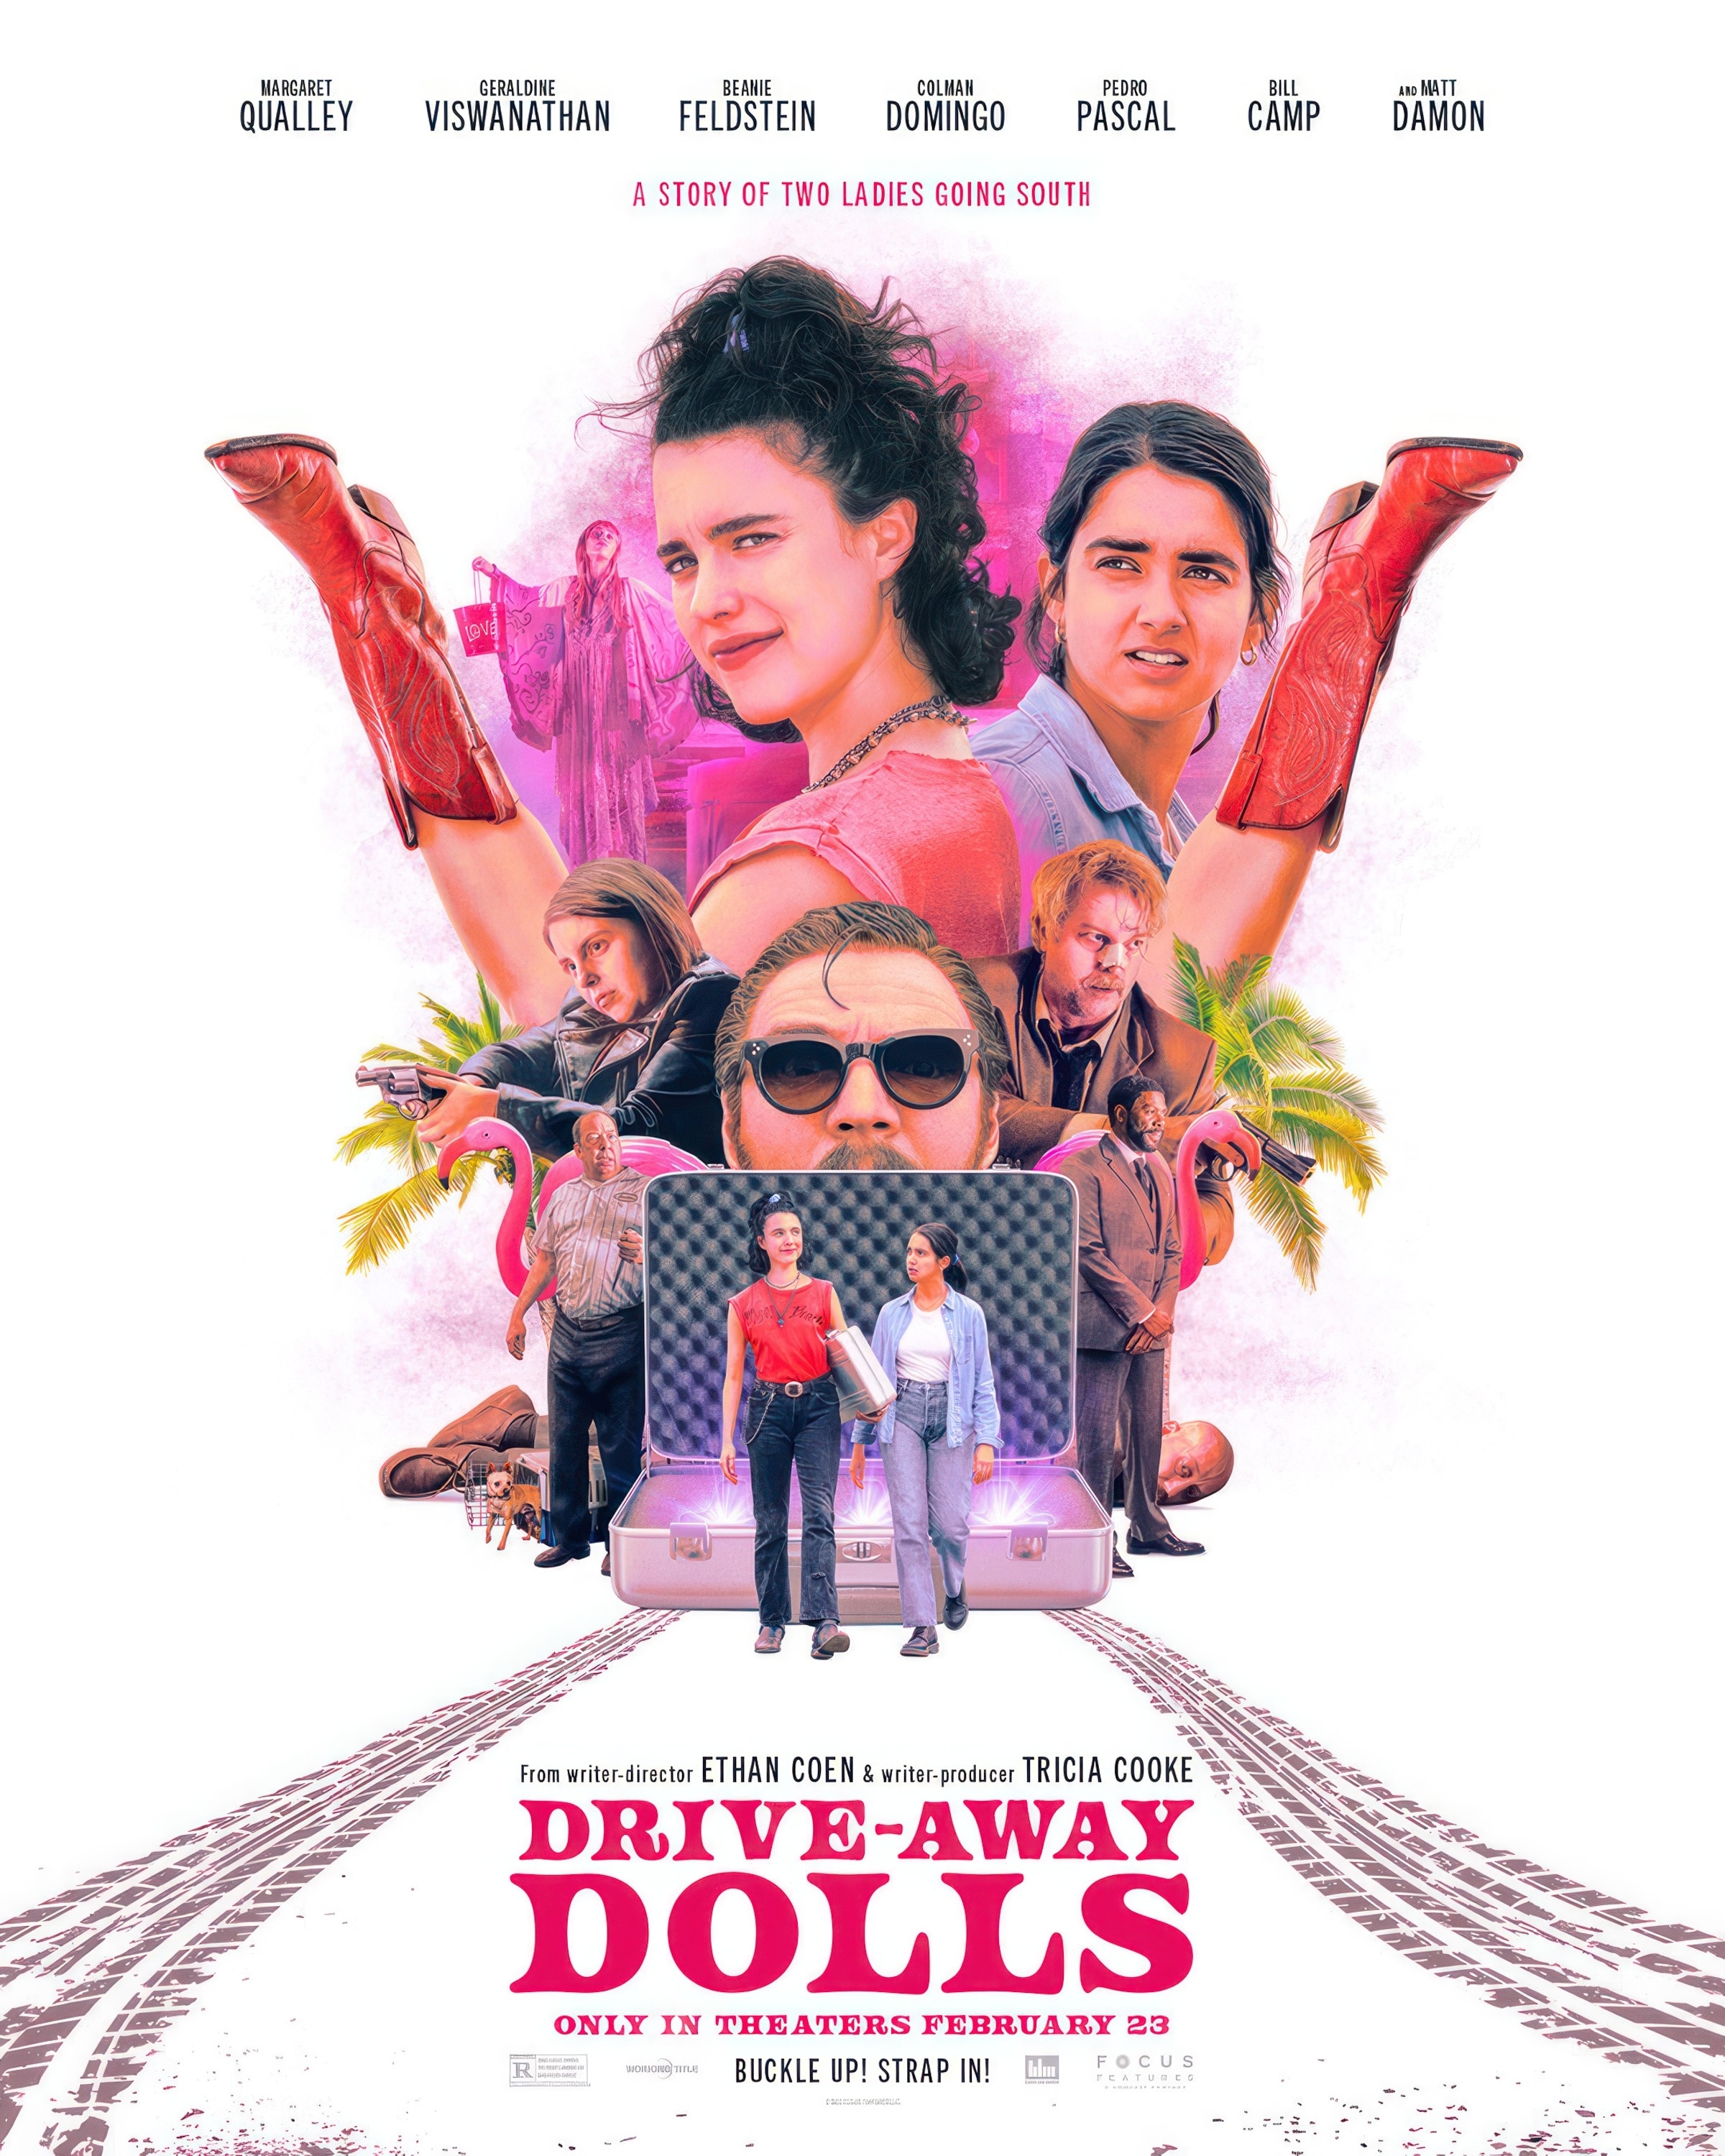 Movie poster for &quot;Drive-Away Dolls&quot; featuring cast with vintage convertible and graphical elements; release information included